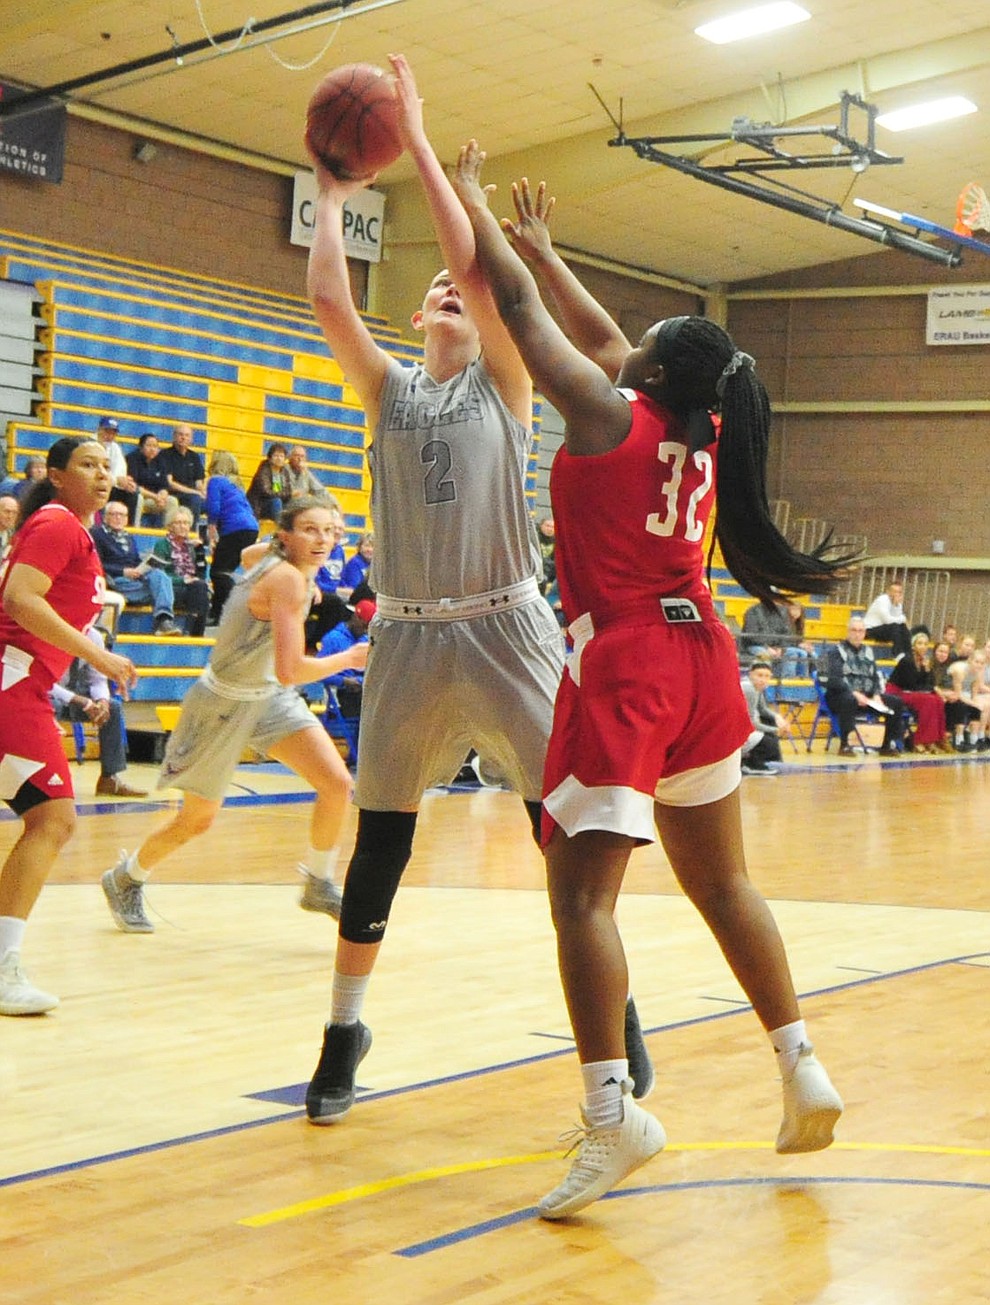 Embry Riddle's Kamryn Brown takes a shot in the paint as the Eagles take on the Simpson University Redhawks Thursday, Jan. 31, 2019 in Prescott. (Les Stukenberg/Courier).